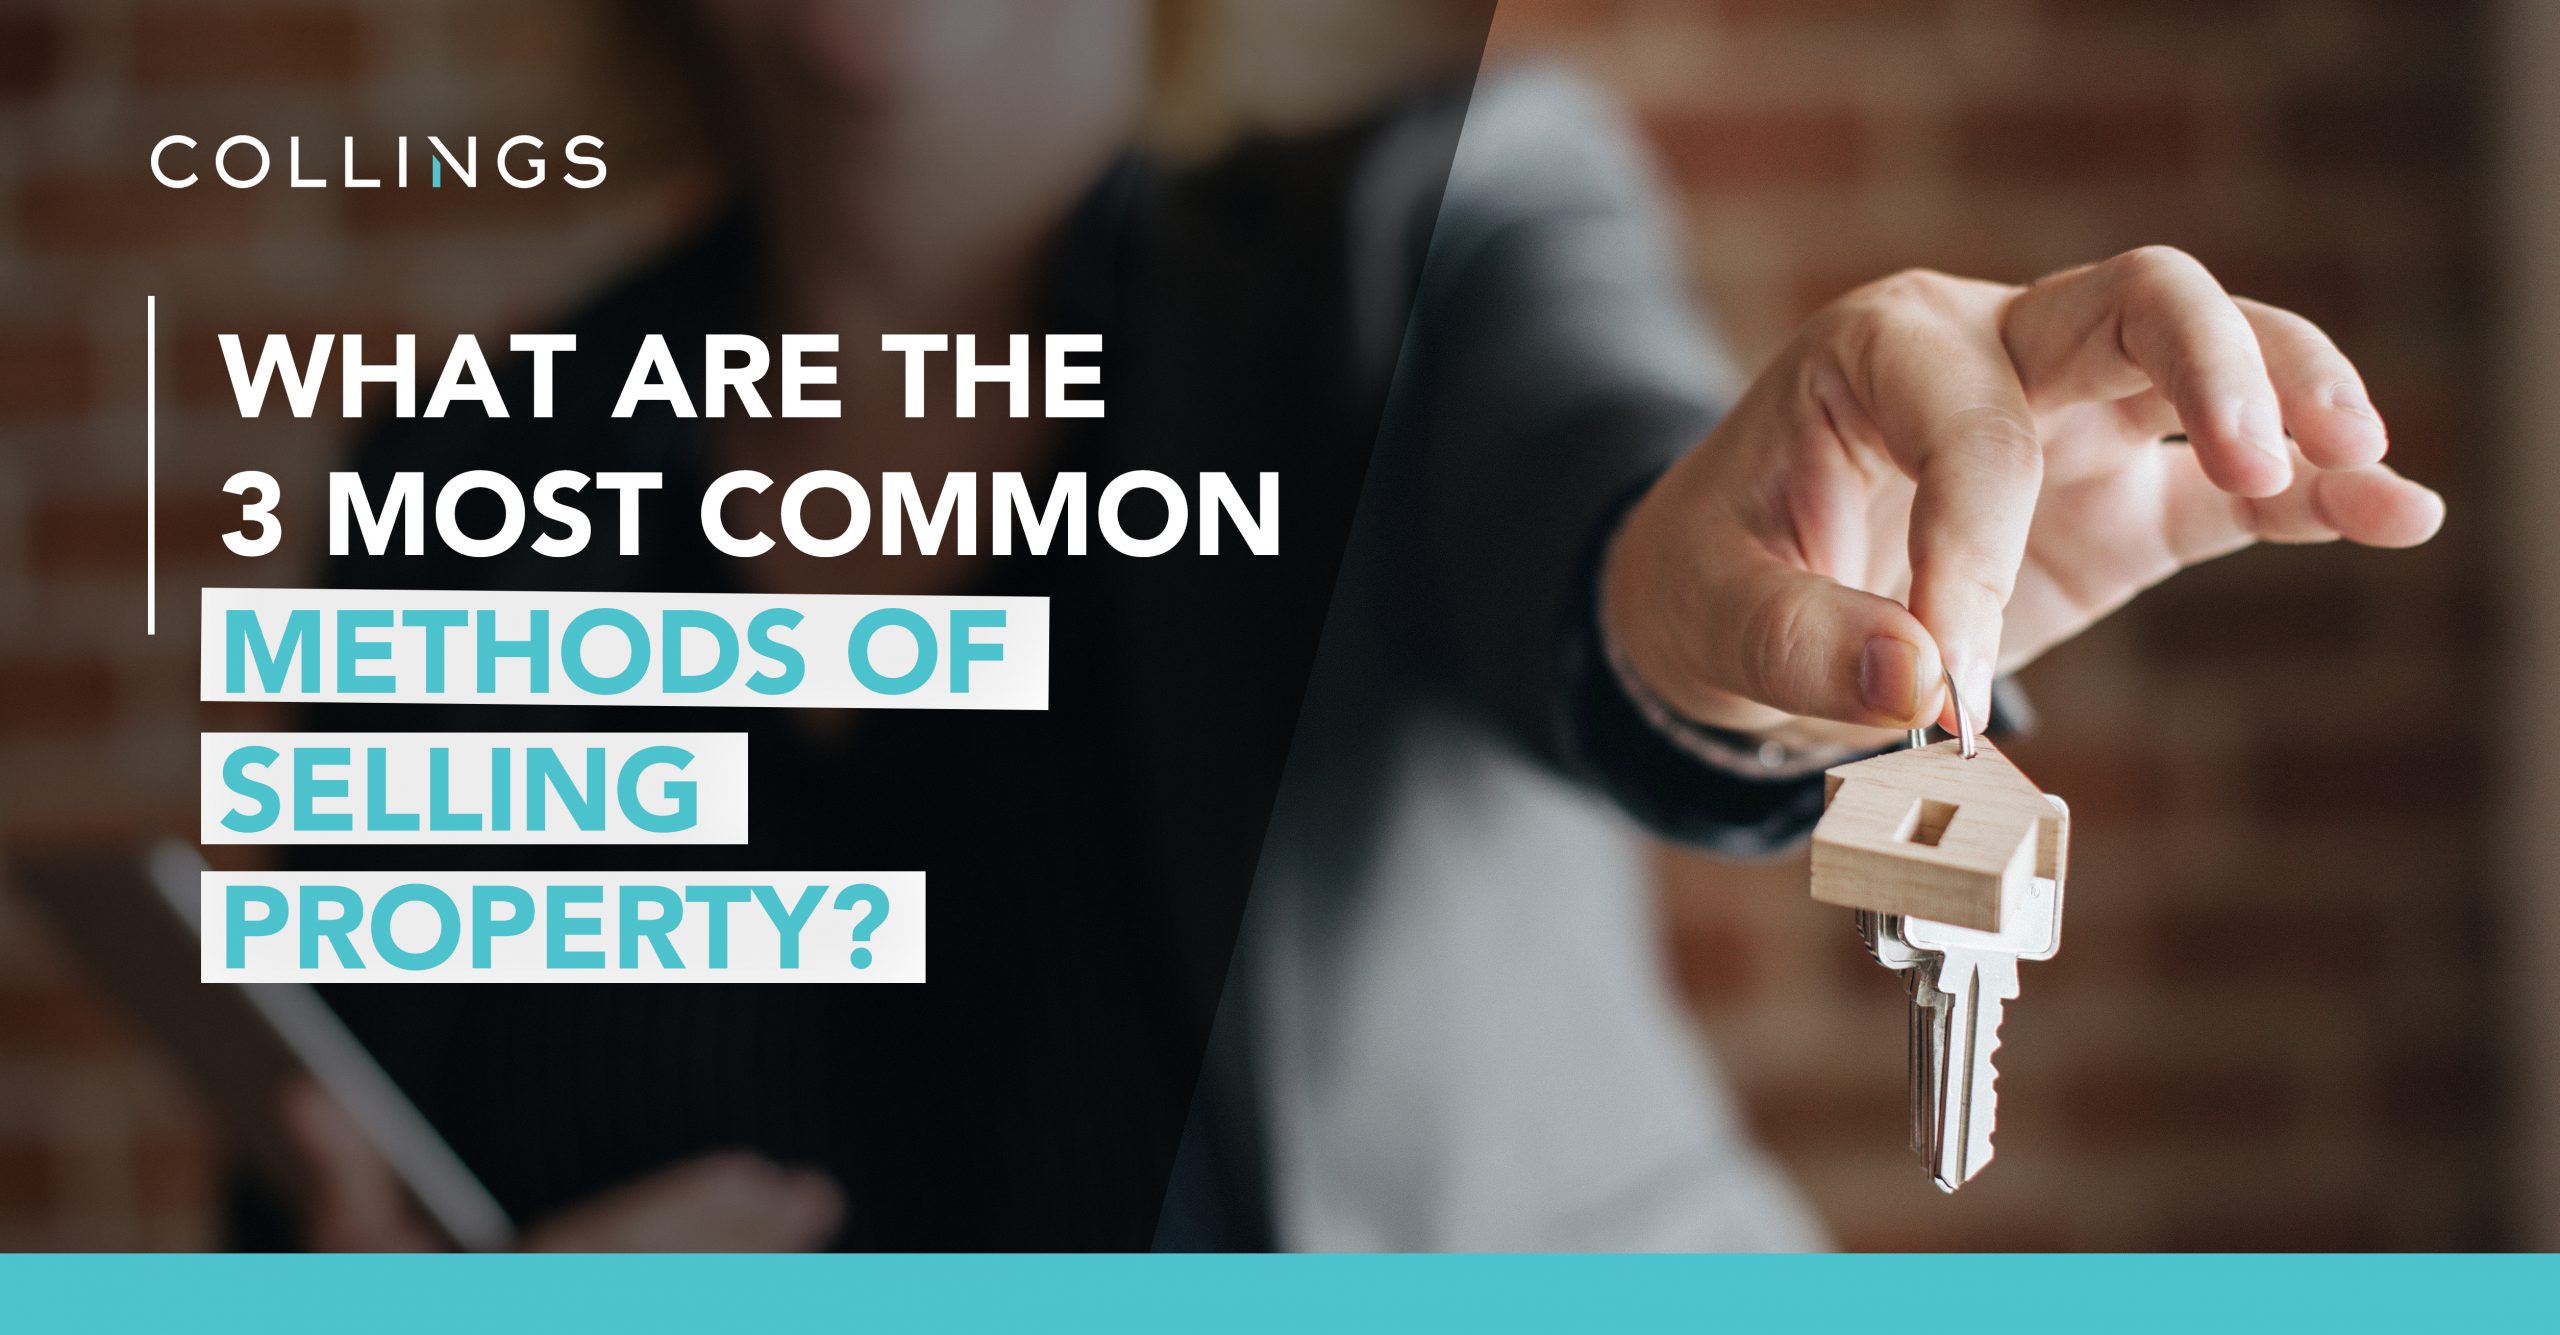 What Are The 3 Most Common Methods of Selling Property?